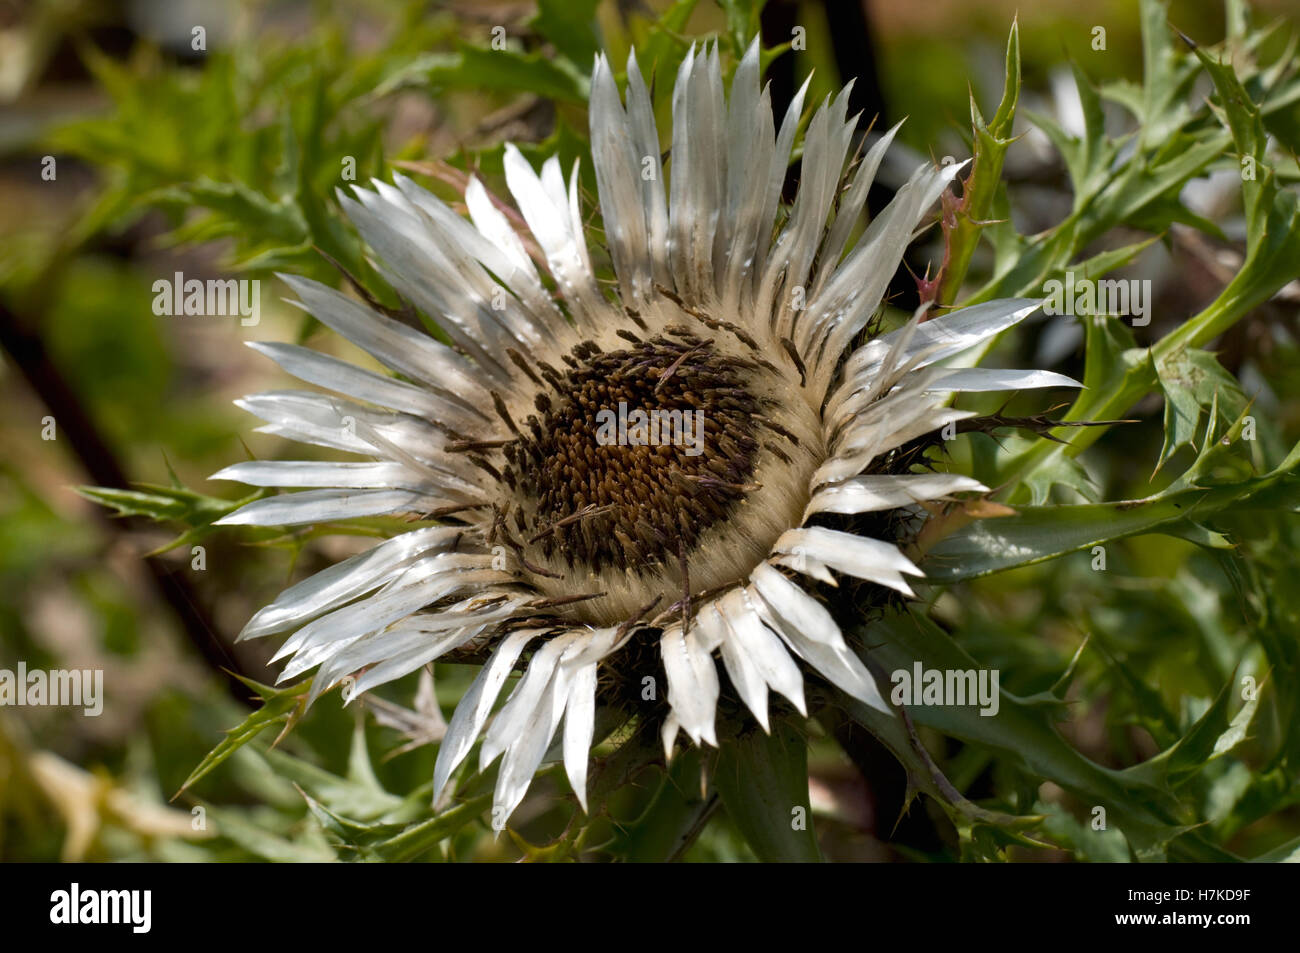 Stemless Carline Thistle or Silver Thistle (Carlina acaulis, Asteraceae) Stock Photo